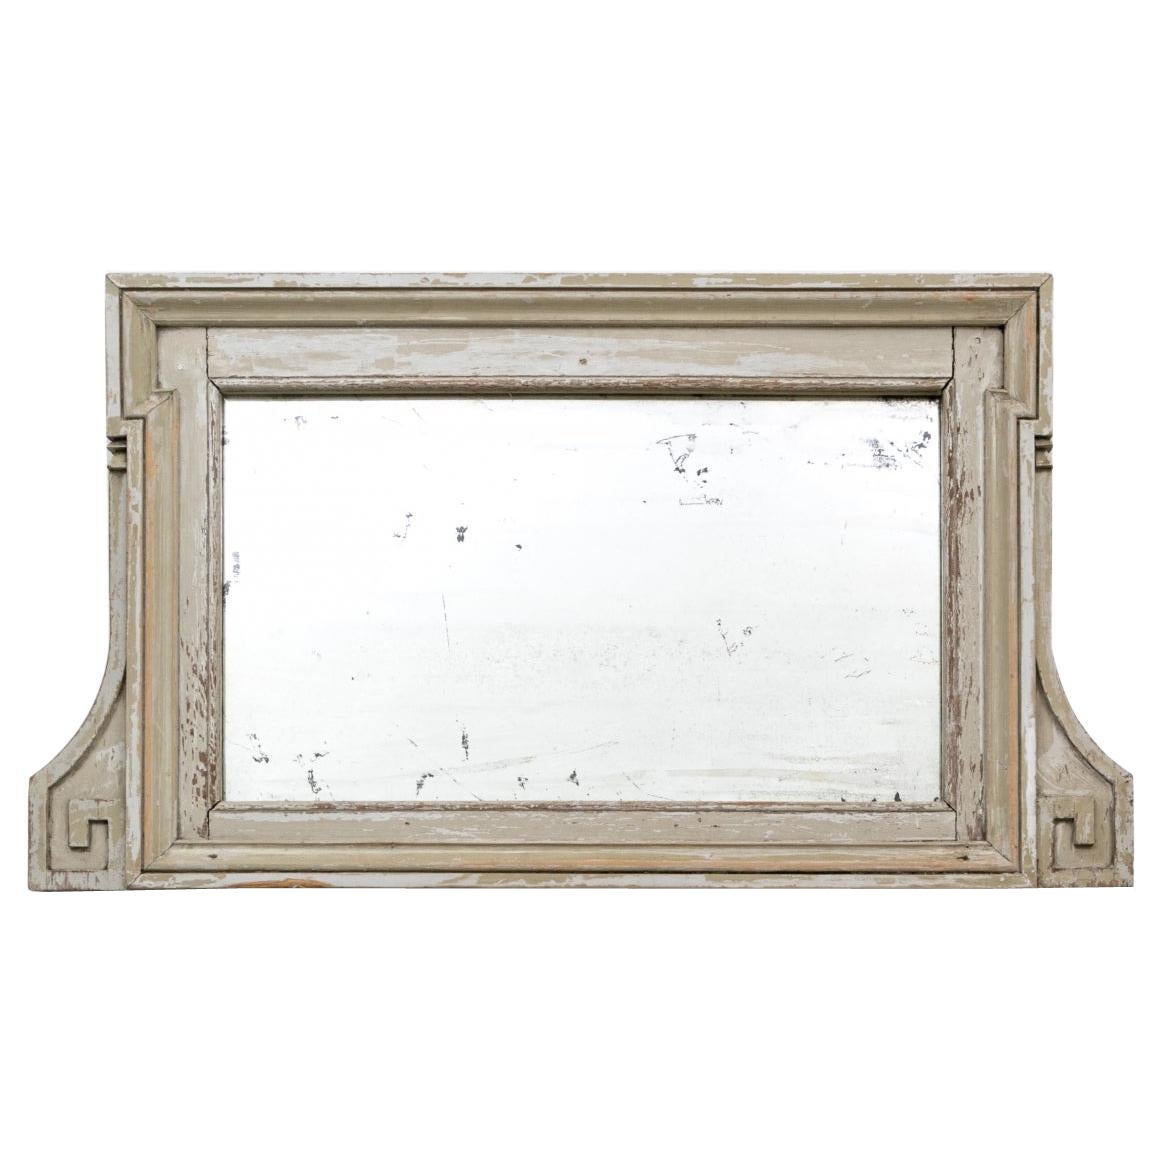 18th/19th C. Gray Paint Decorated Mirror